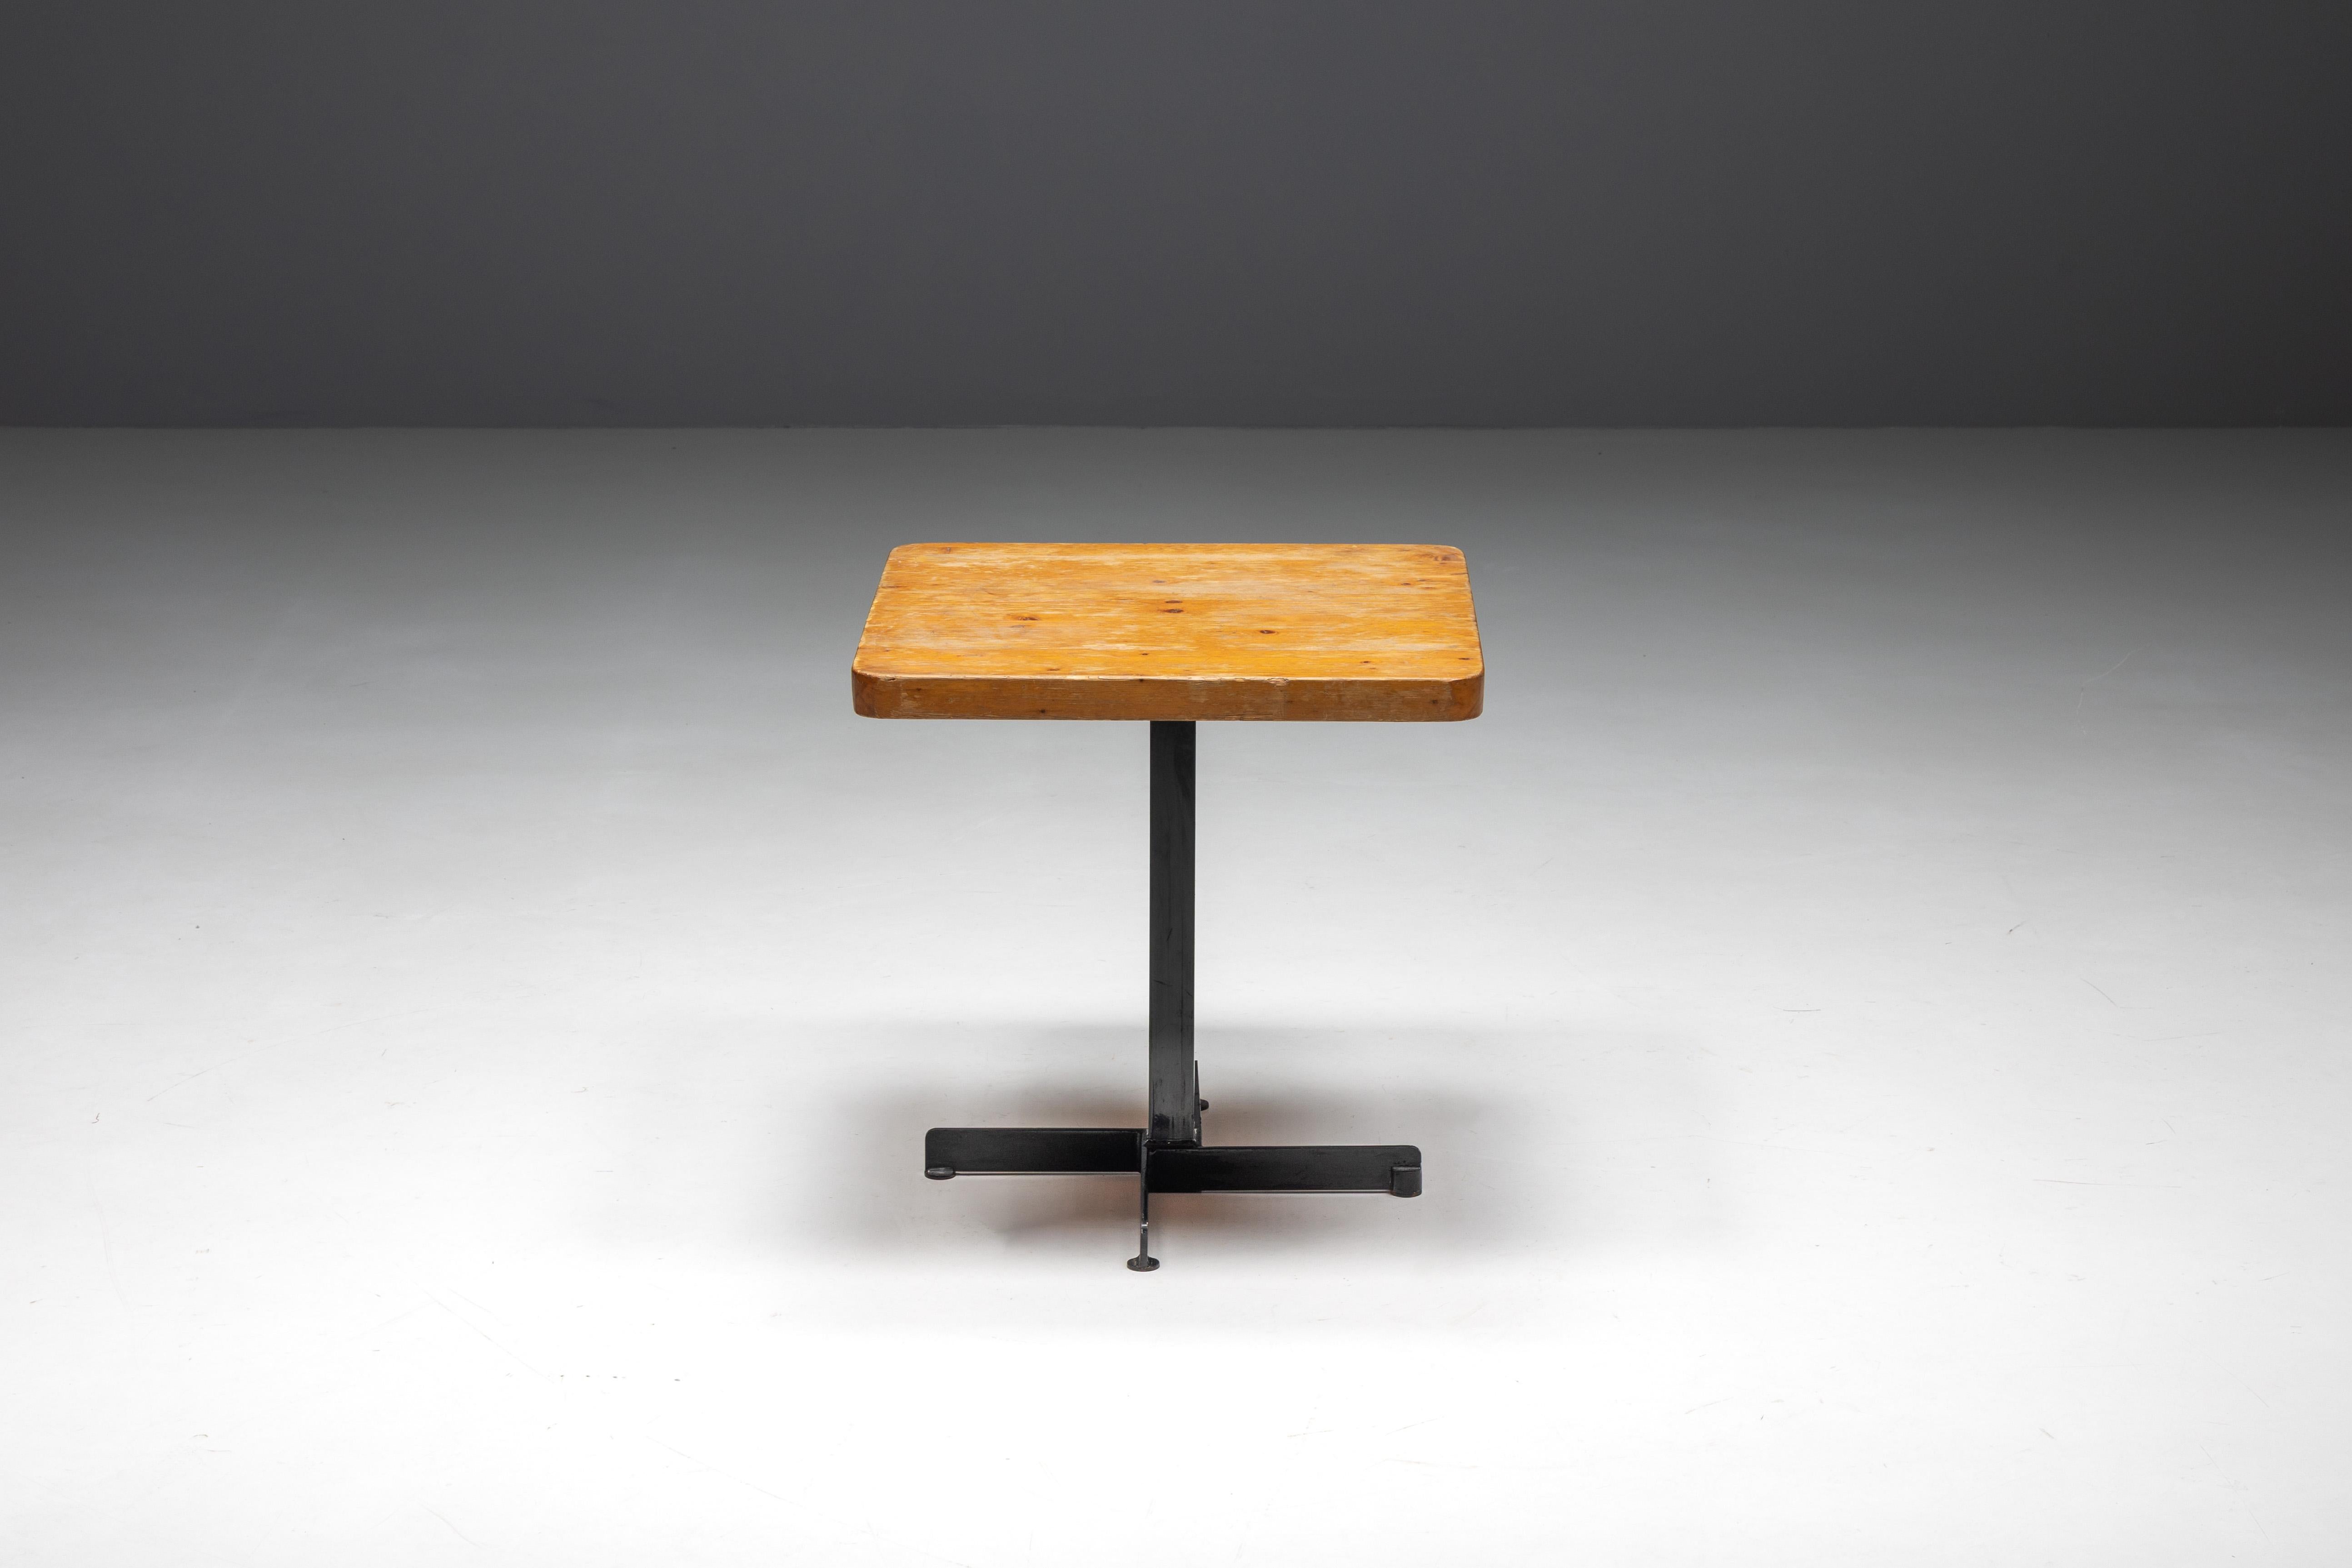 Square table by Charlotte Perriand for Les Arcs ski resort in France, embodying the timeless elegance of Mid-Century Modern dining. This table features a square pine table top gracefully supported by a sophisticated black metal frame. The tabletop